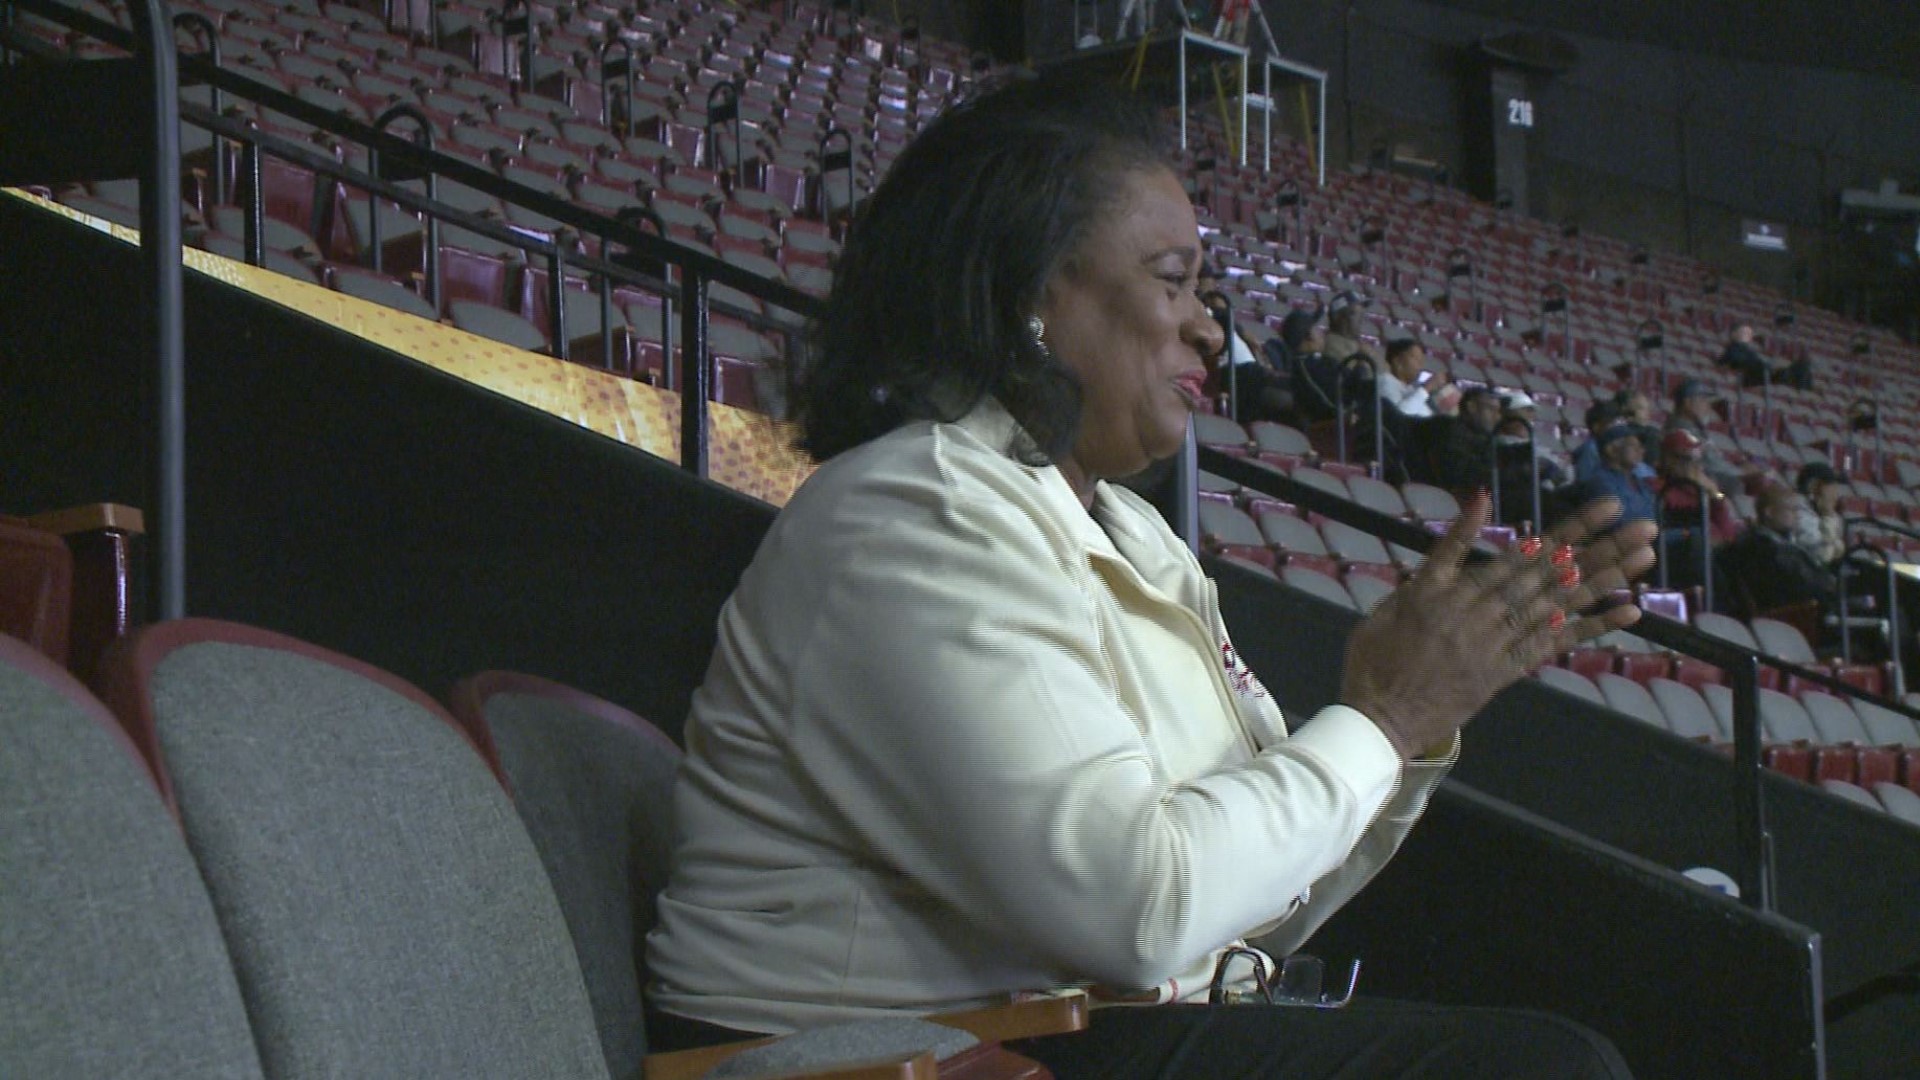 Dr. Sandi Hutchinson has been coming to the MEAC & CIAA basketball tournaments for nearly 45 years.